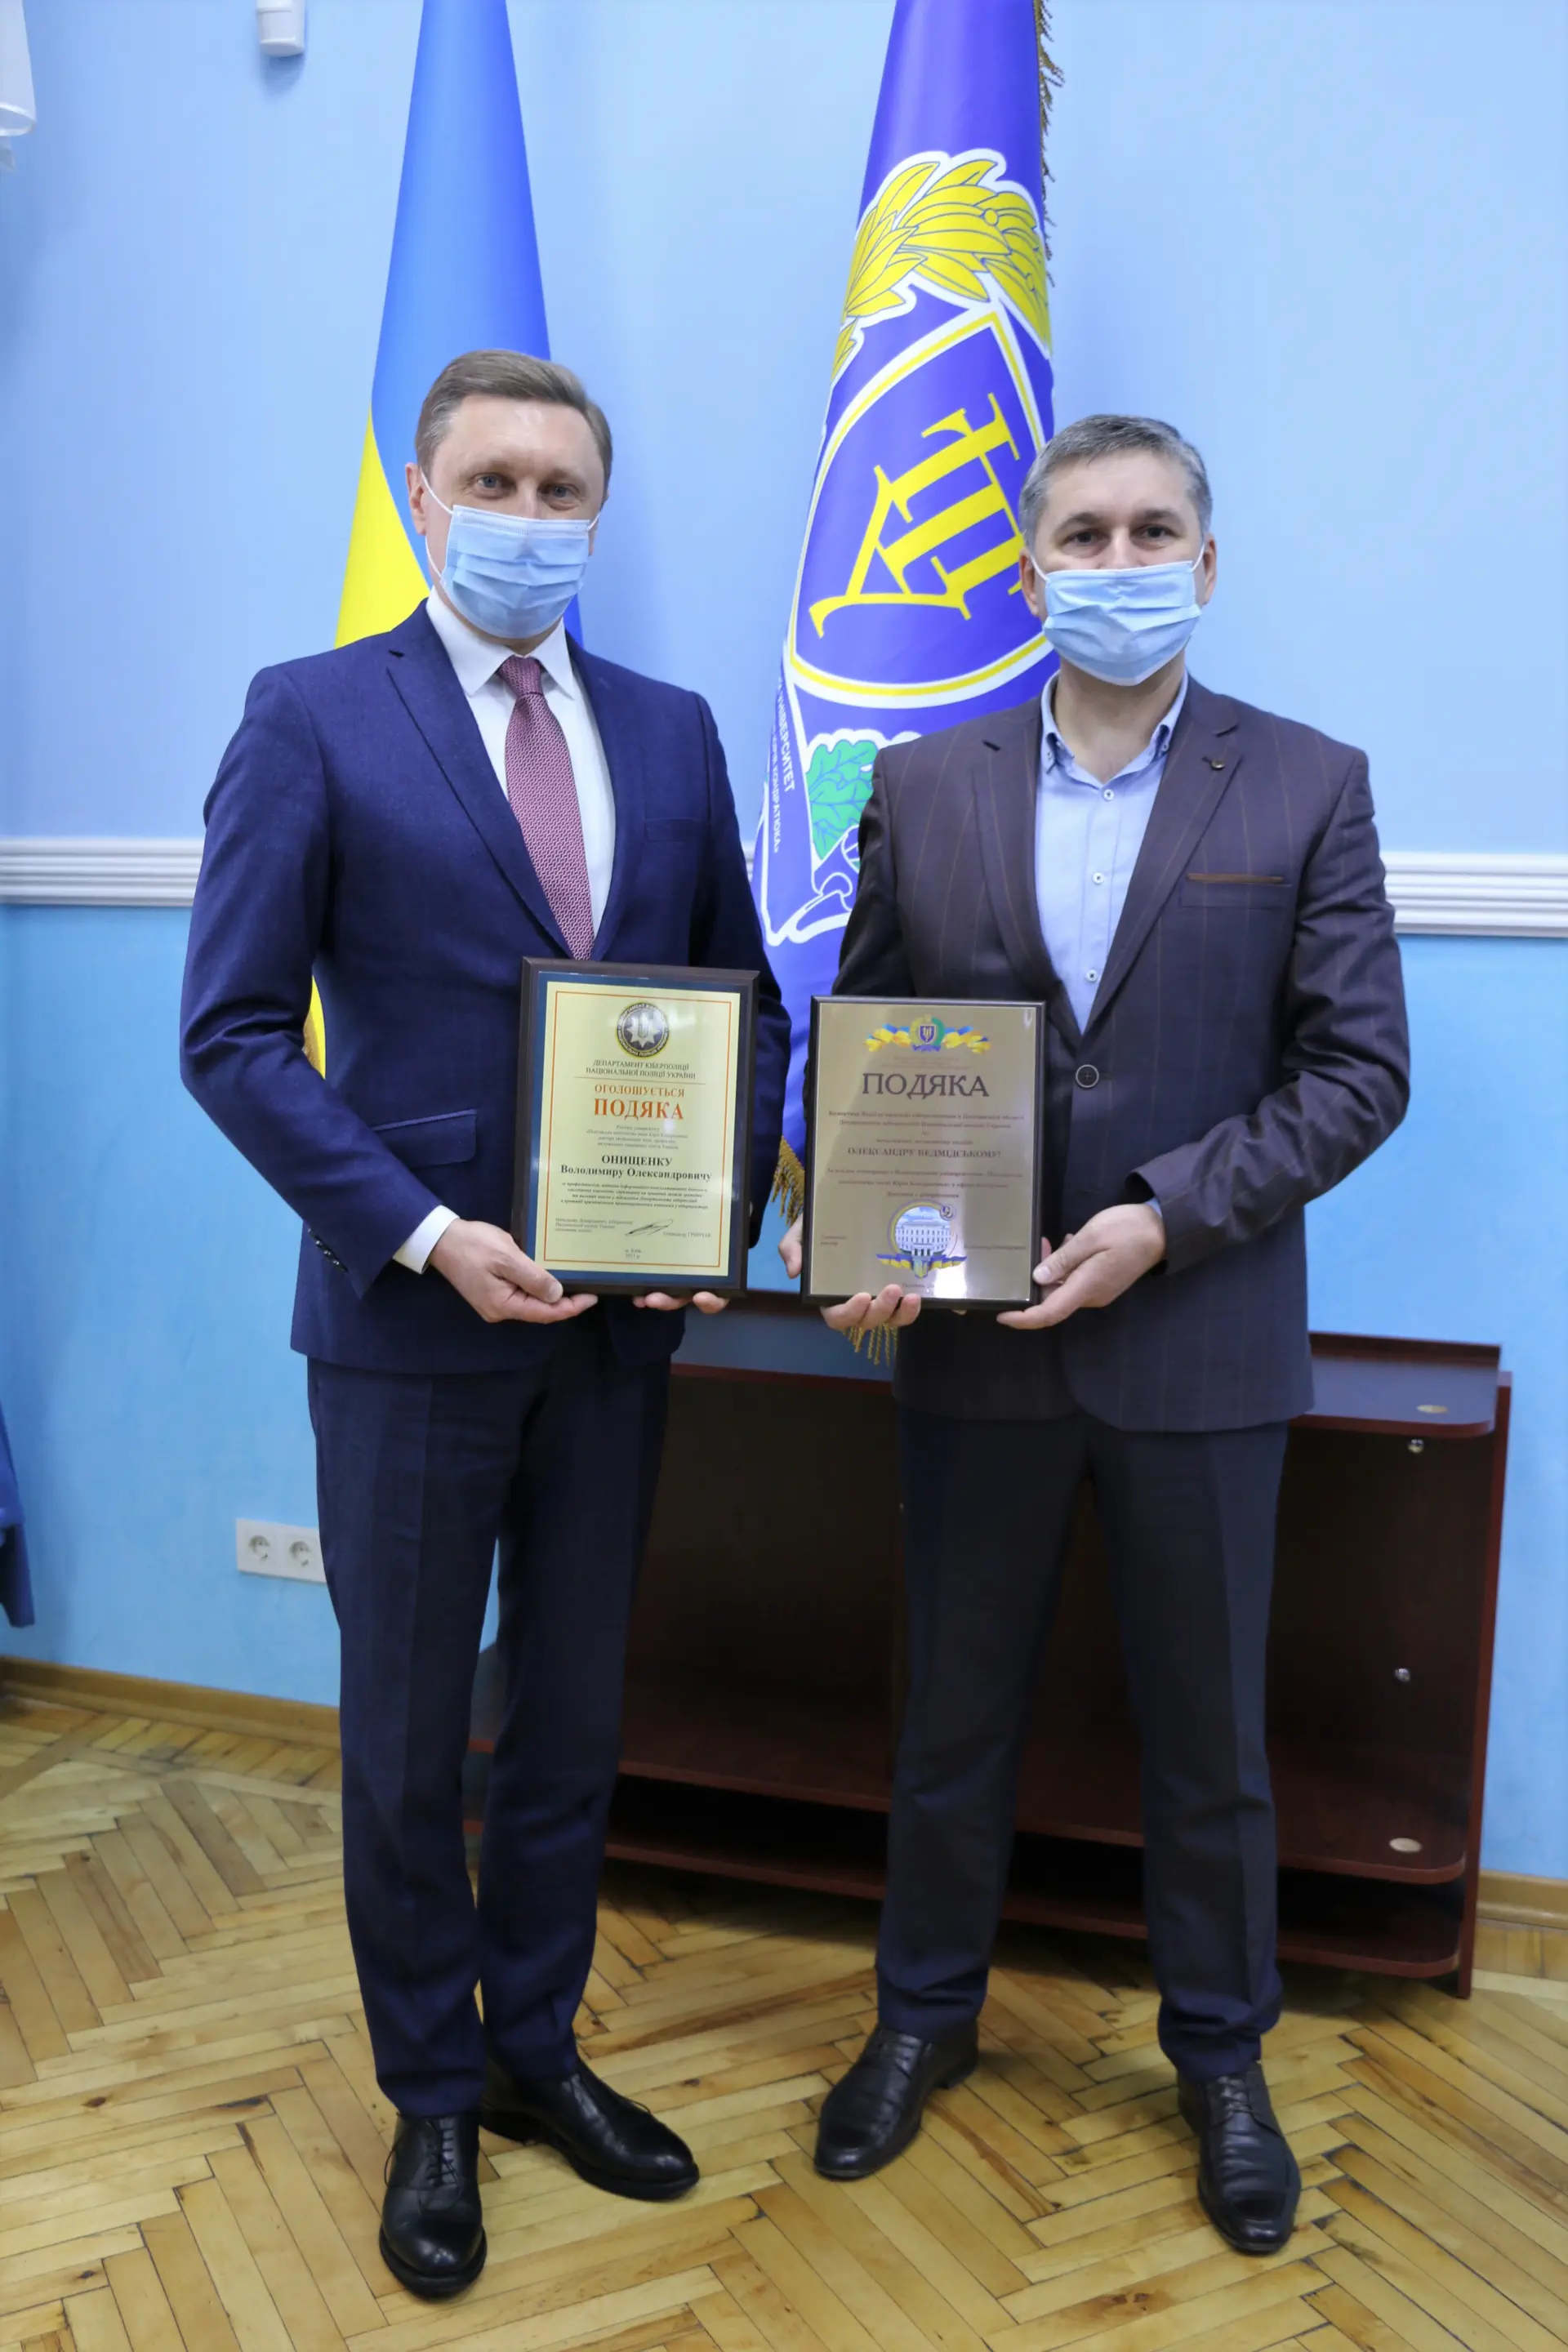 University Awarded for Contributing to the Fight Against Cyber Crimes and the Training of IT Specialists